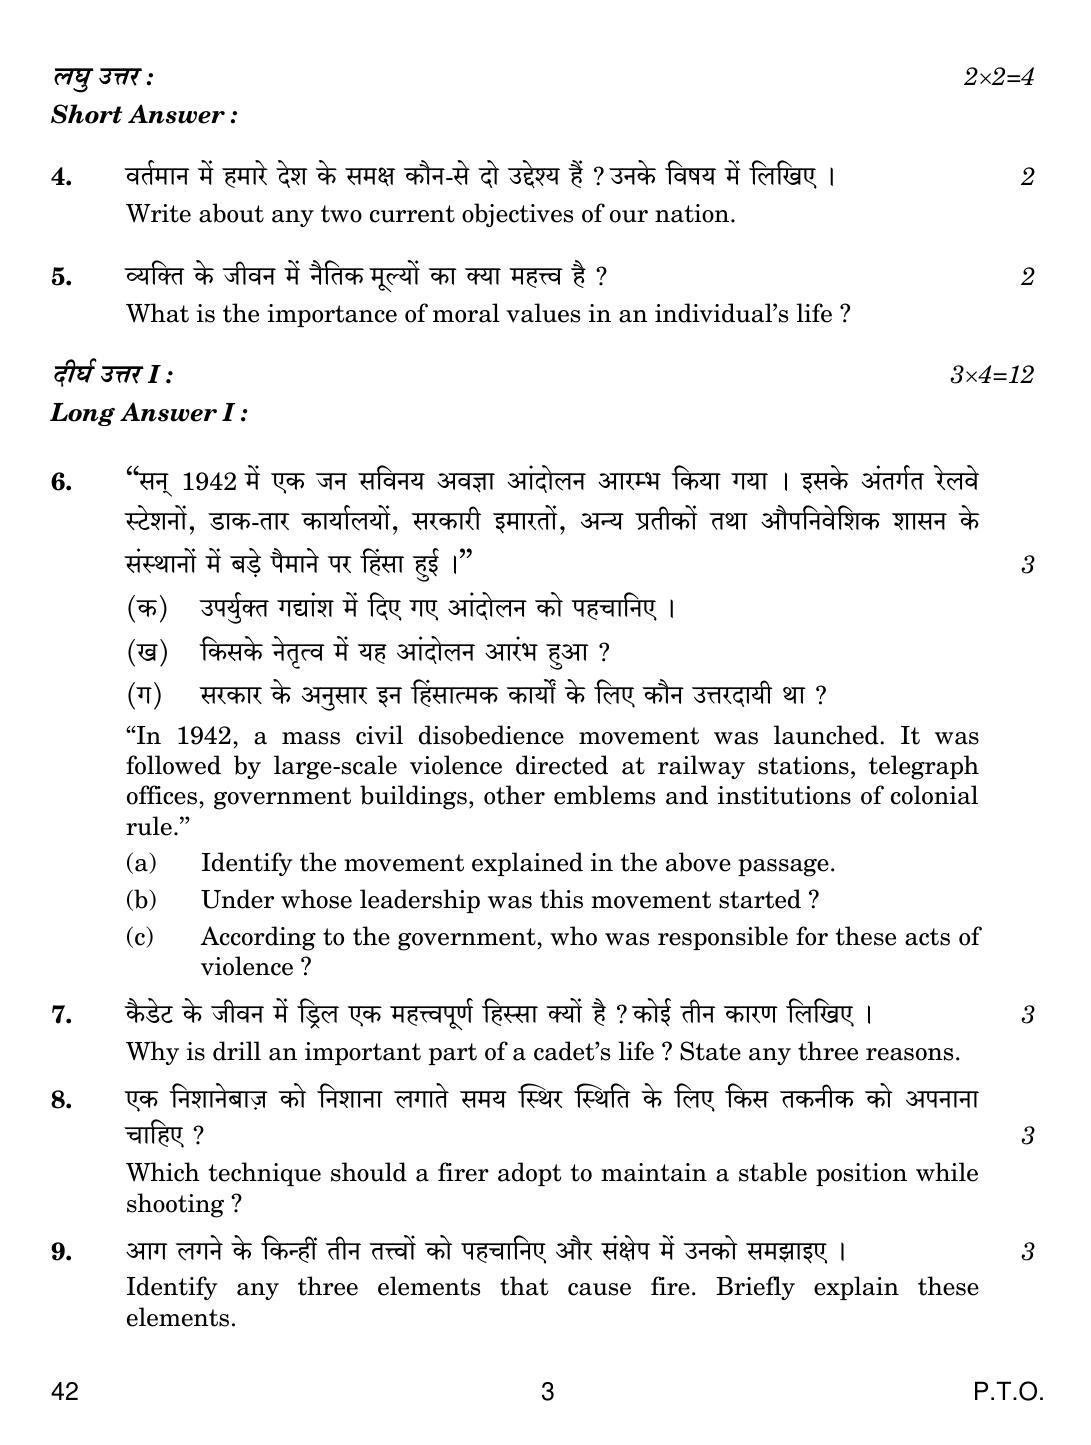 CBSE Class 12 42 National Cadet Corps (NCC) 2019 Question Paper - Page 3